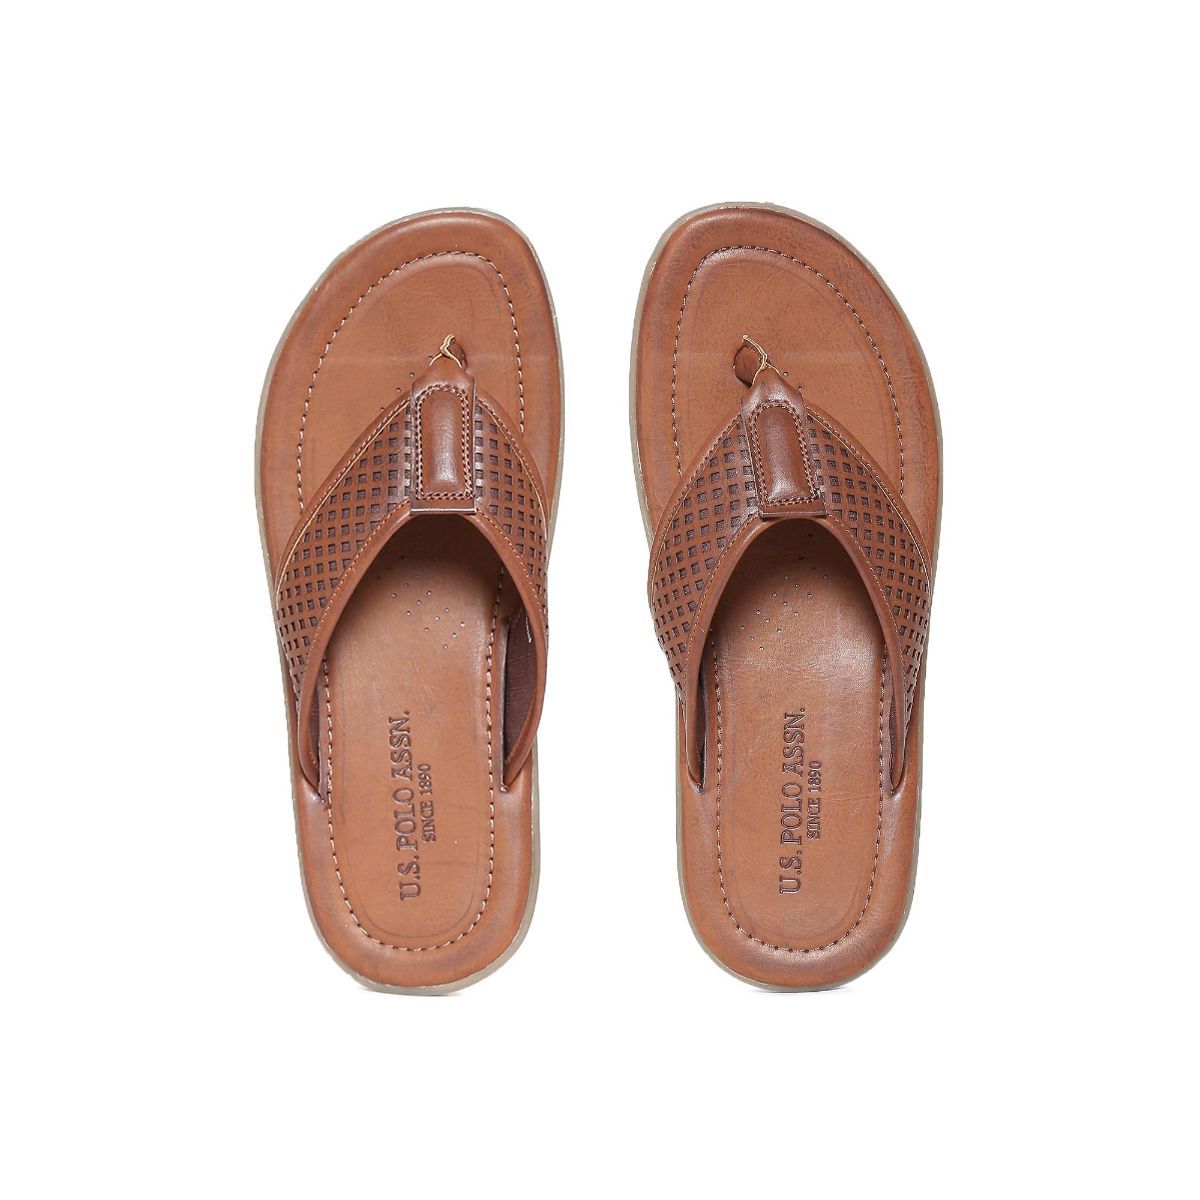 Details more than 176 us polo sandals online latest